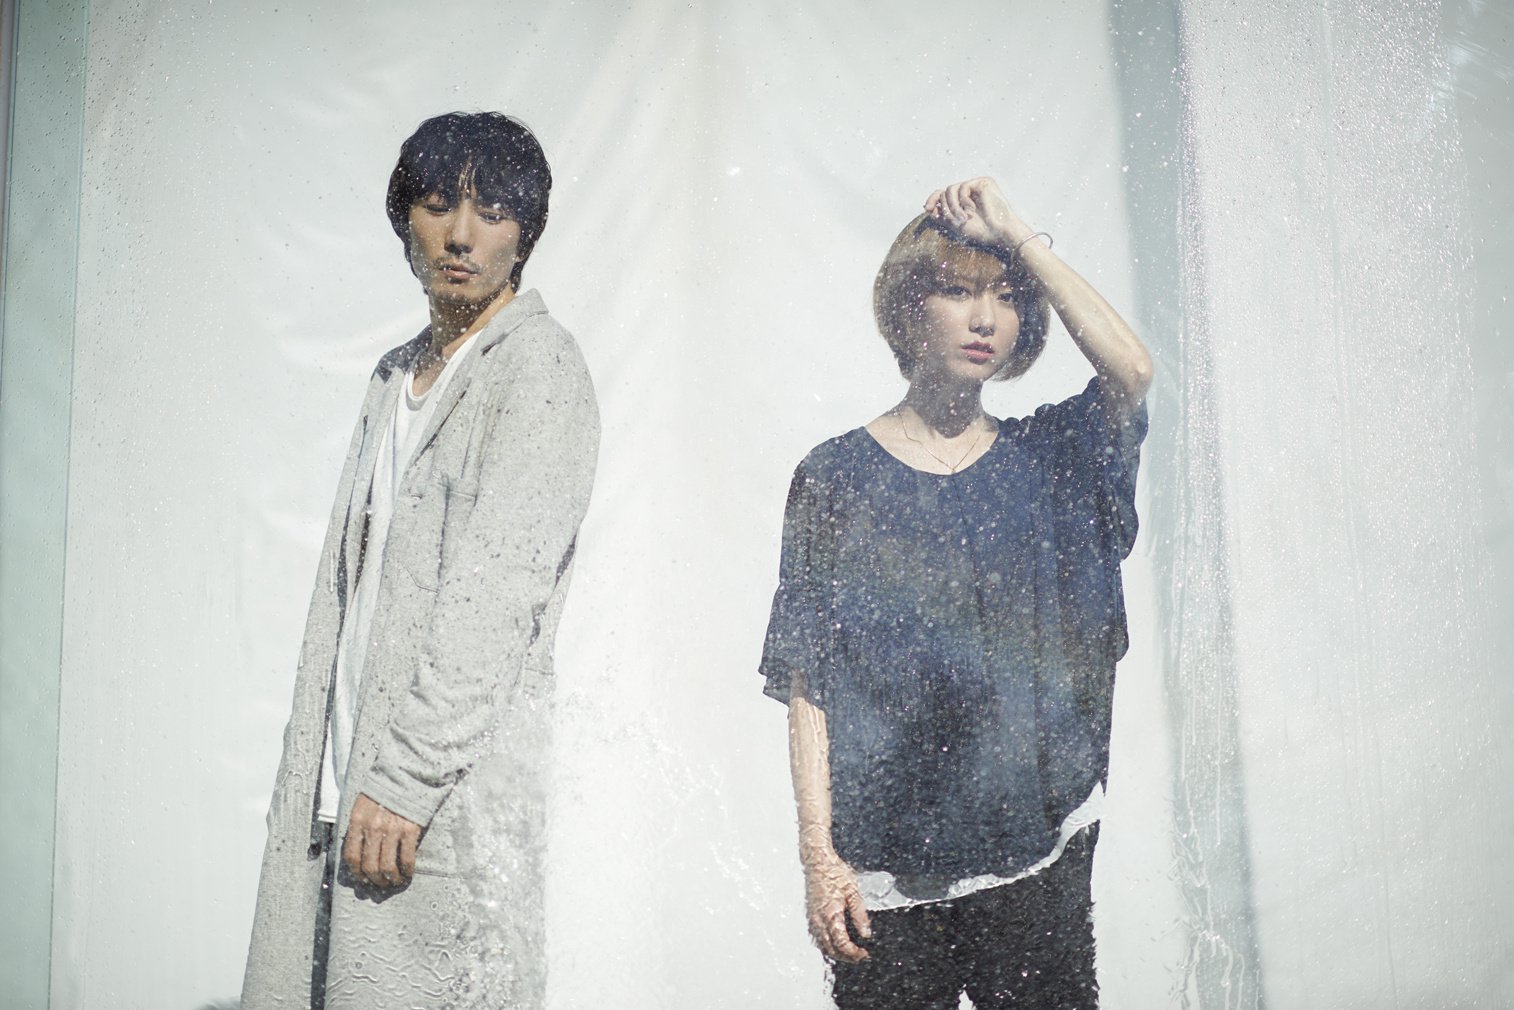 moumoon sing “Hello,shooting-star” to keep dear things alive